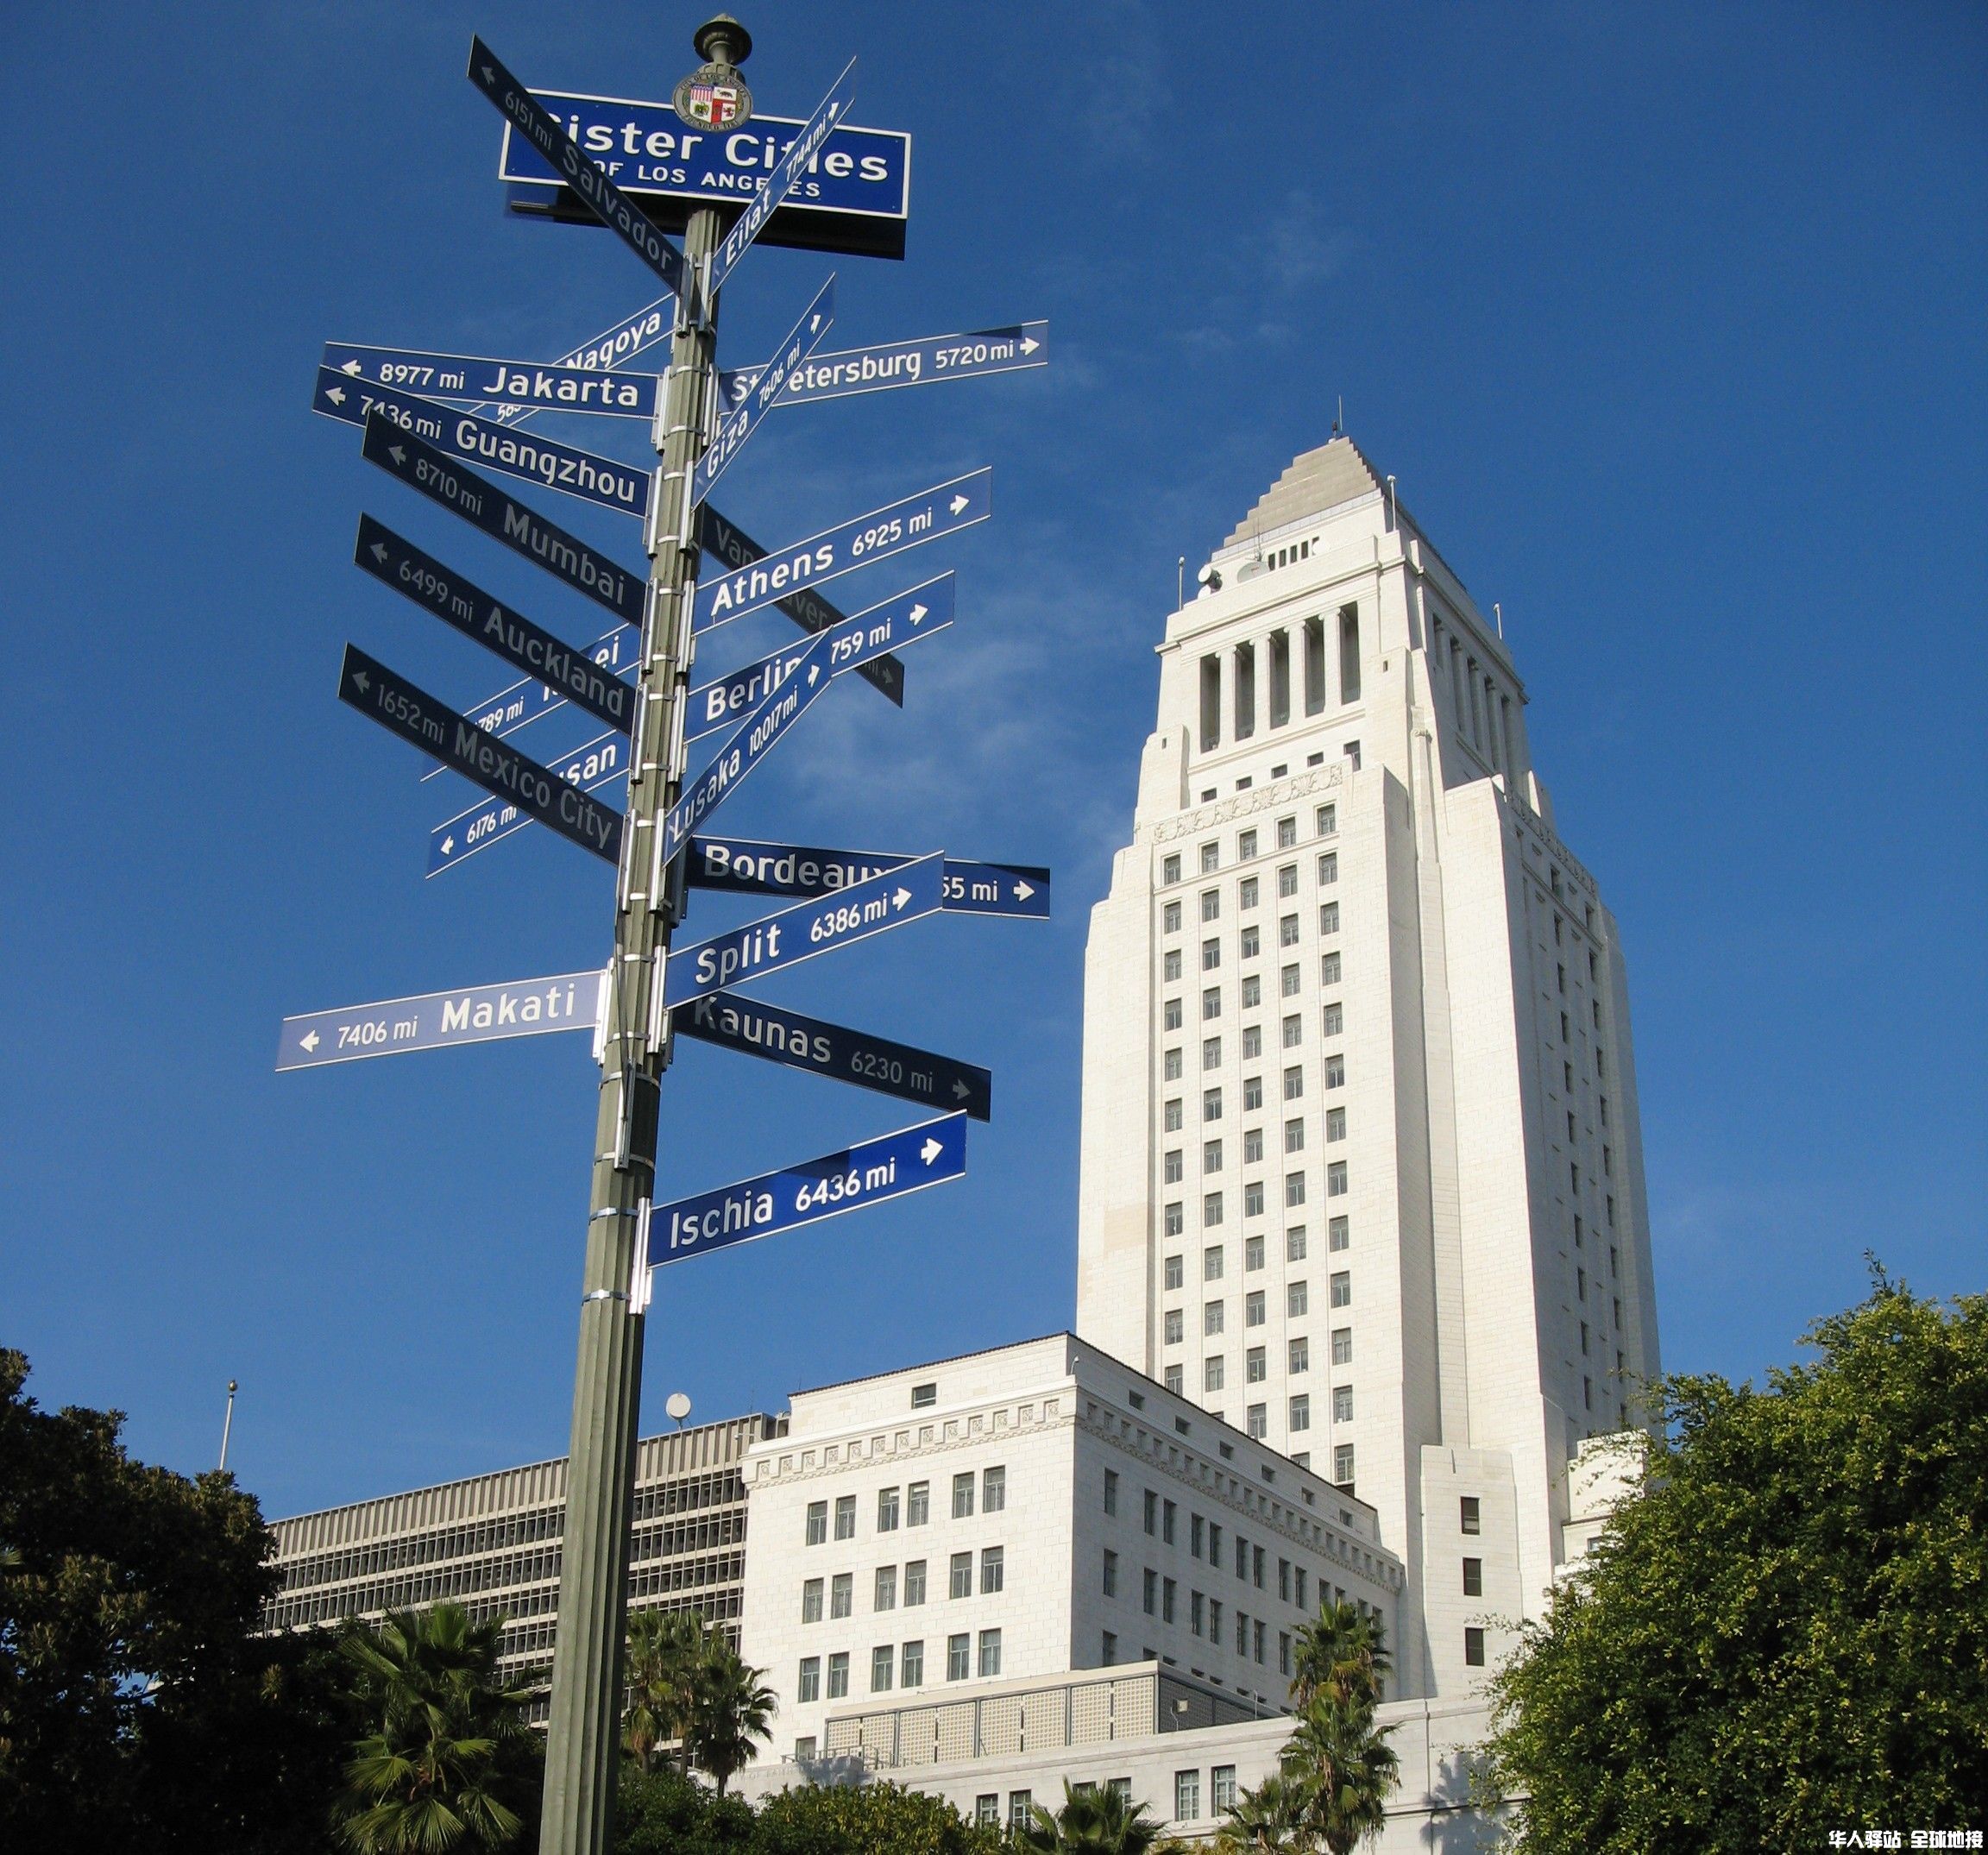 Los_Angeles_City_Hall_with_sister_cities_2006-e1427304108273.jpg